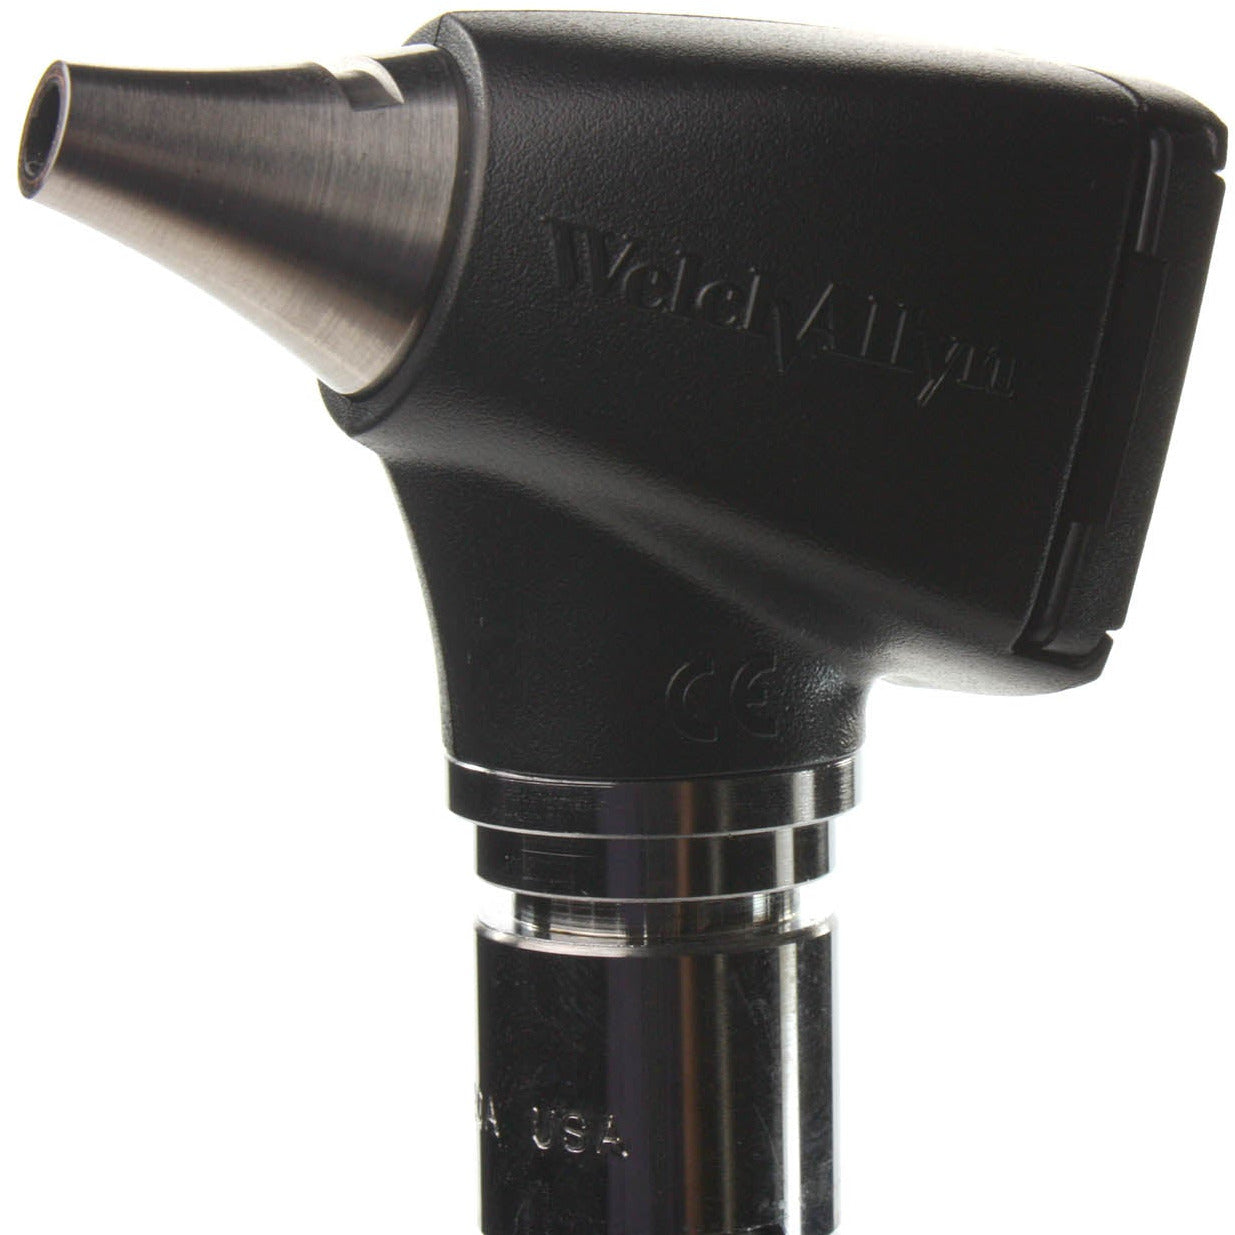 Welch Allyn LED 3.5v Diagnostic Otoscope - Head Only